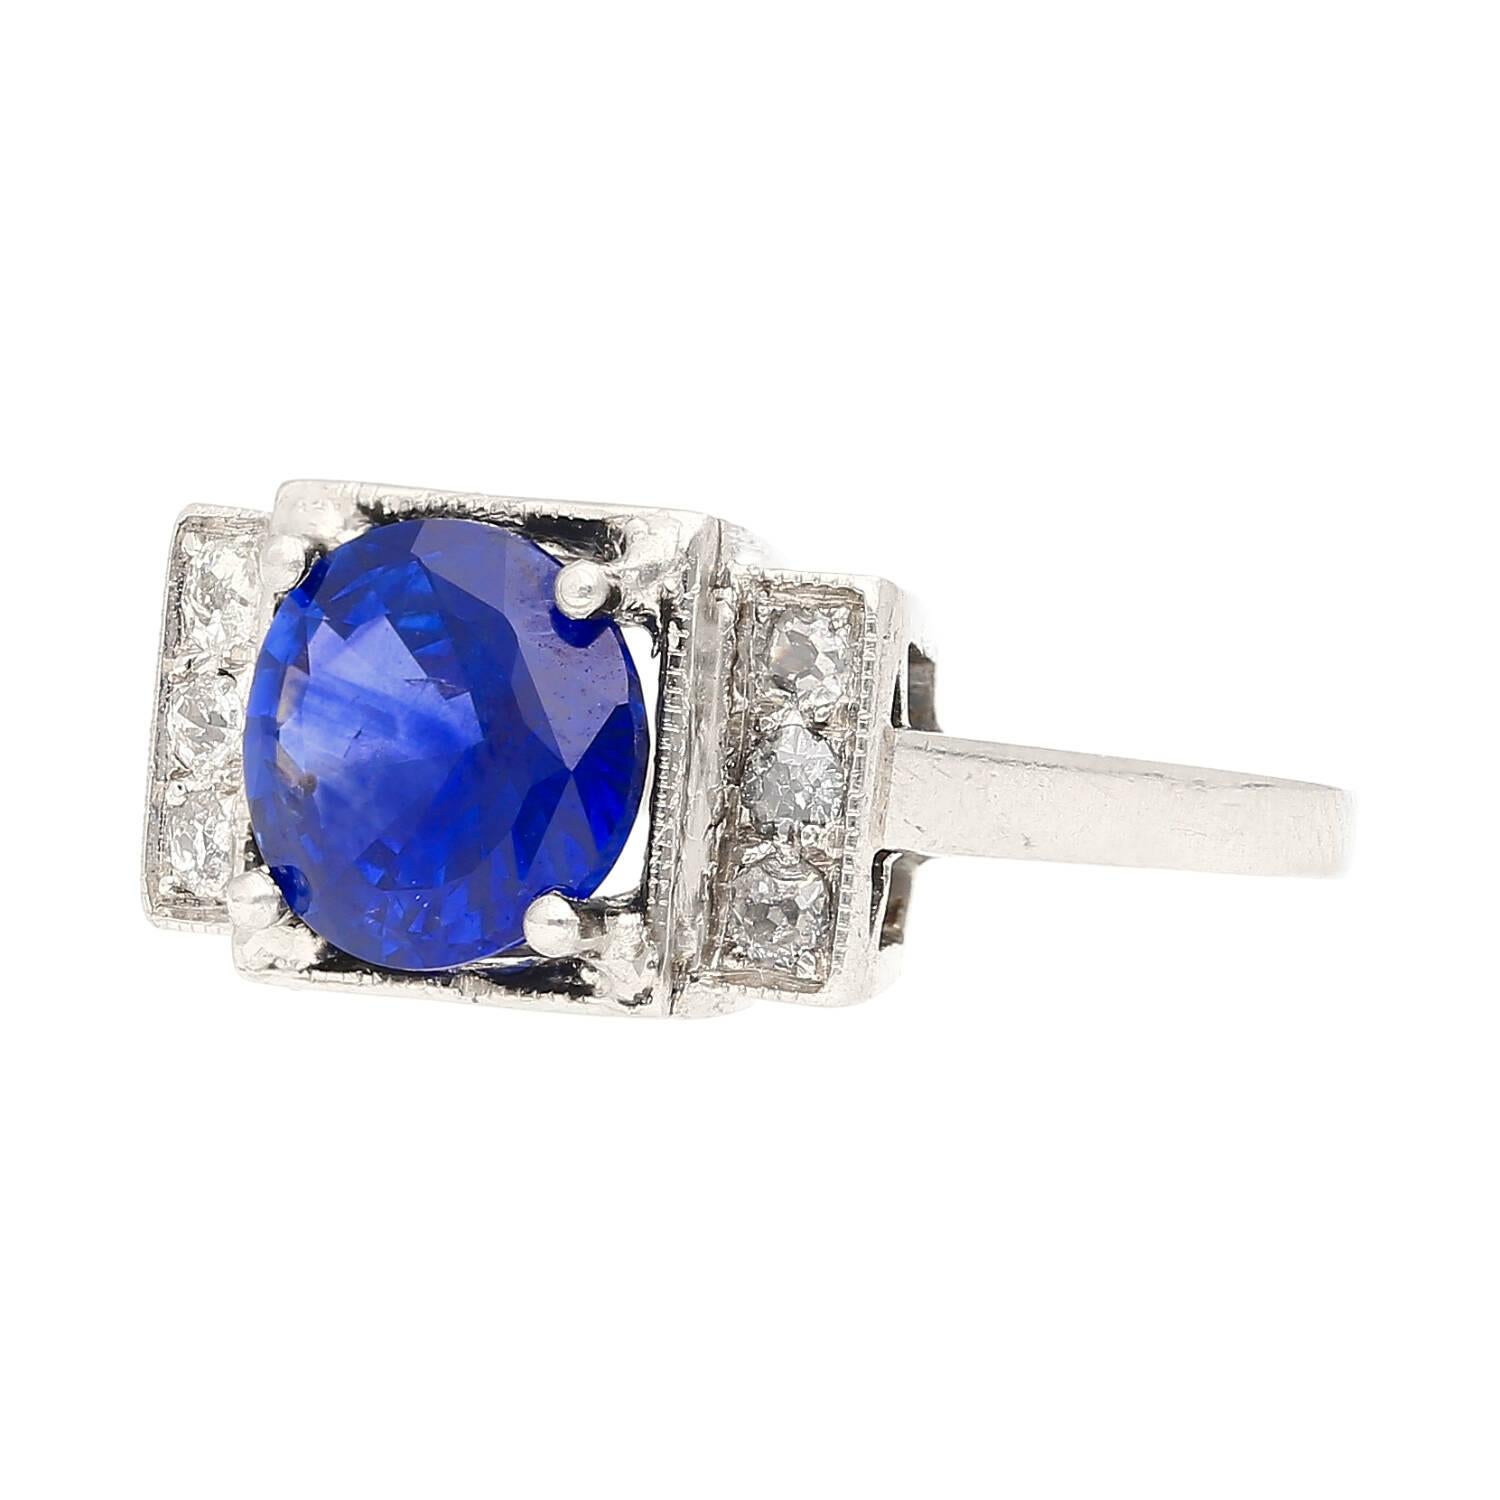 Platinum Set Art Deco Ring With 2.47 Carat Round Cut No Heat Vivid Royal Blue Sapphire and Round Diamond Side Stone.

Vintage Art Deco sapphire and diamond engagement ring, set in platinum 900. Centering a GRS-certified 